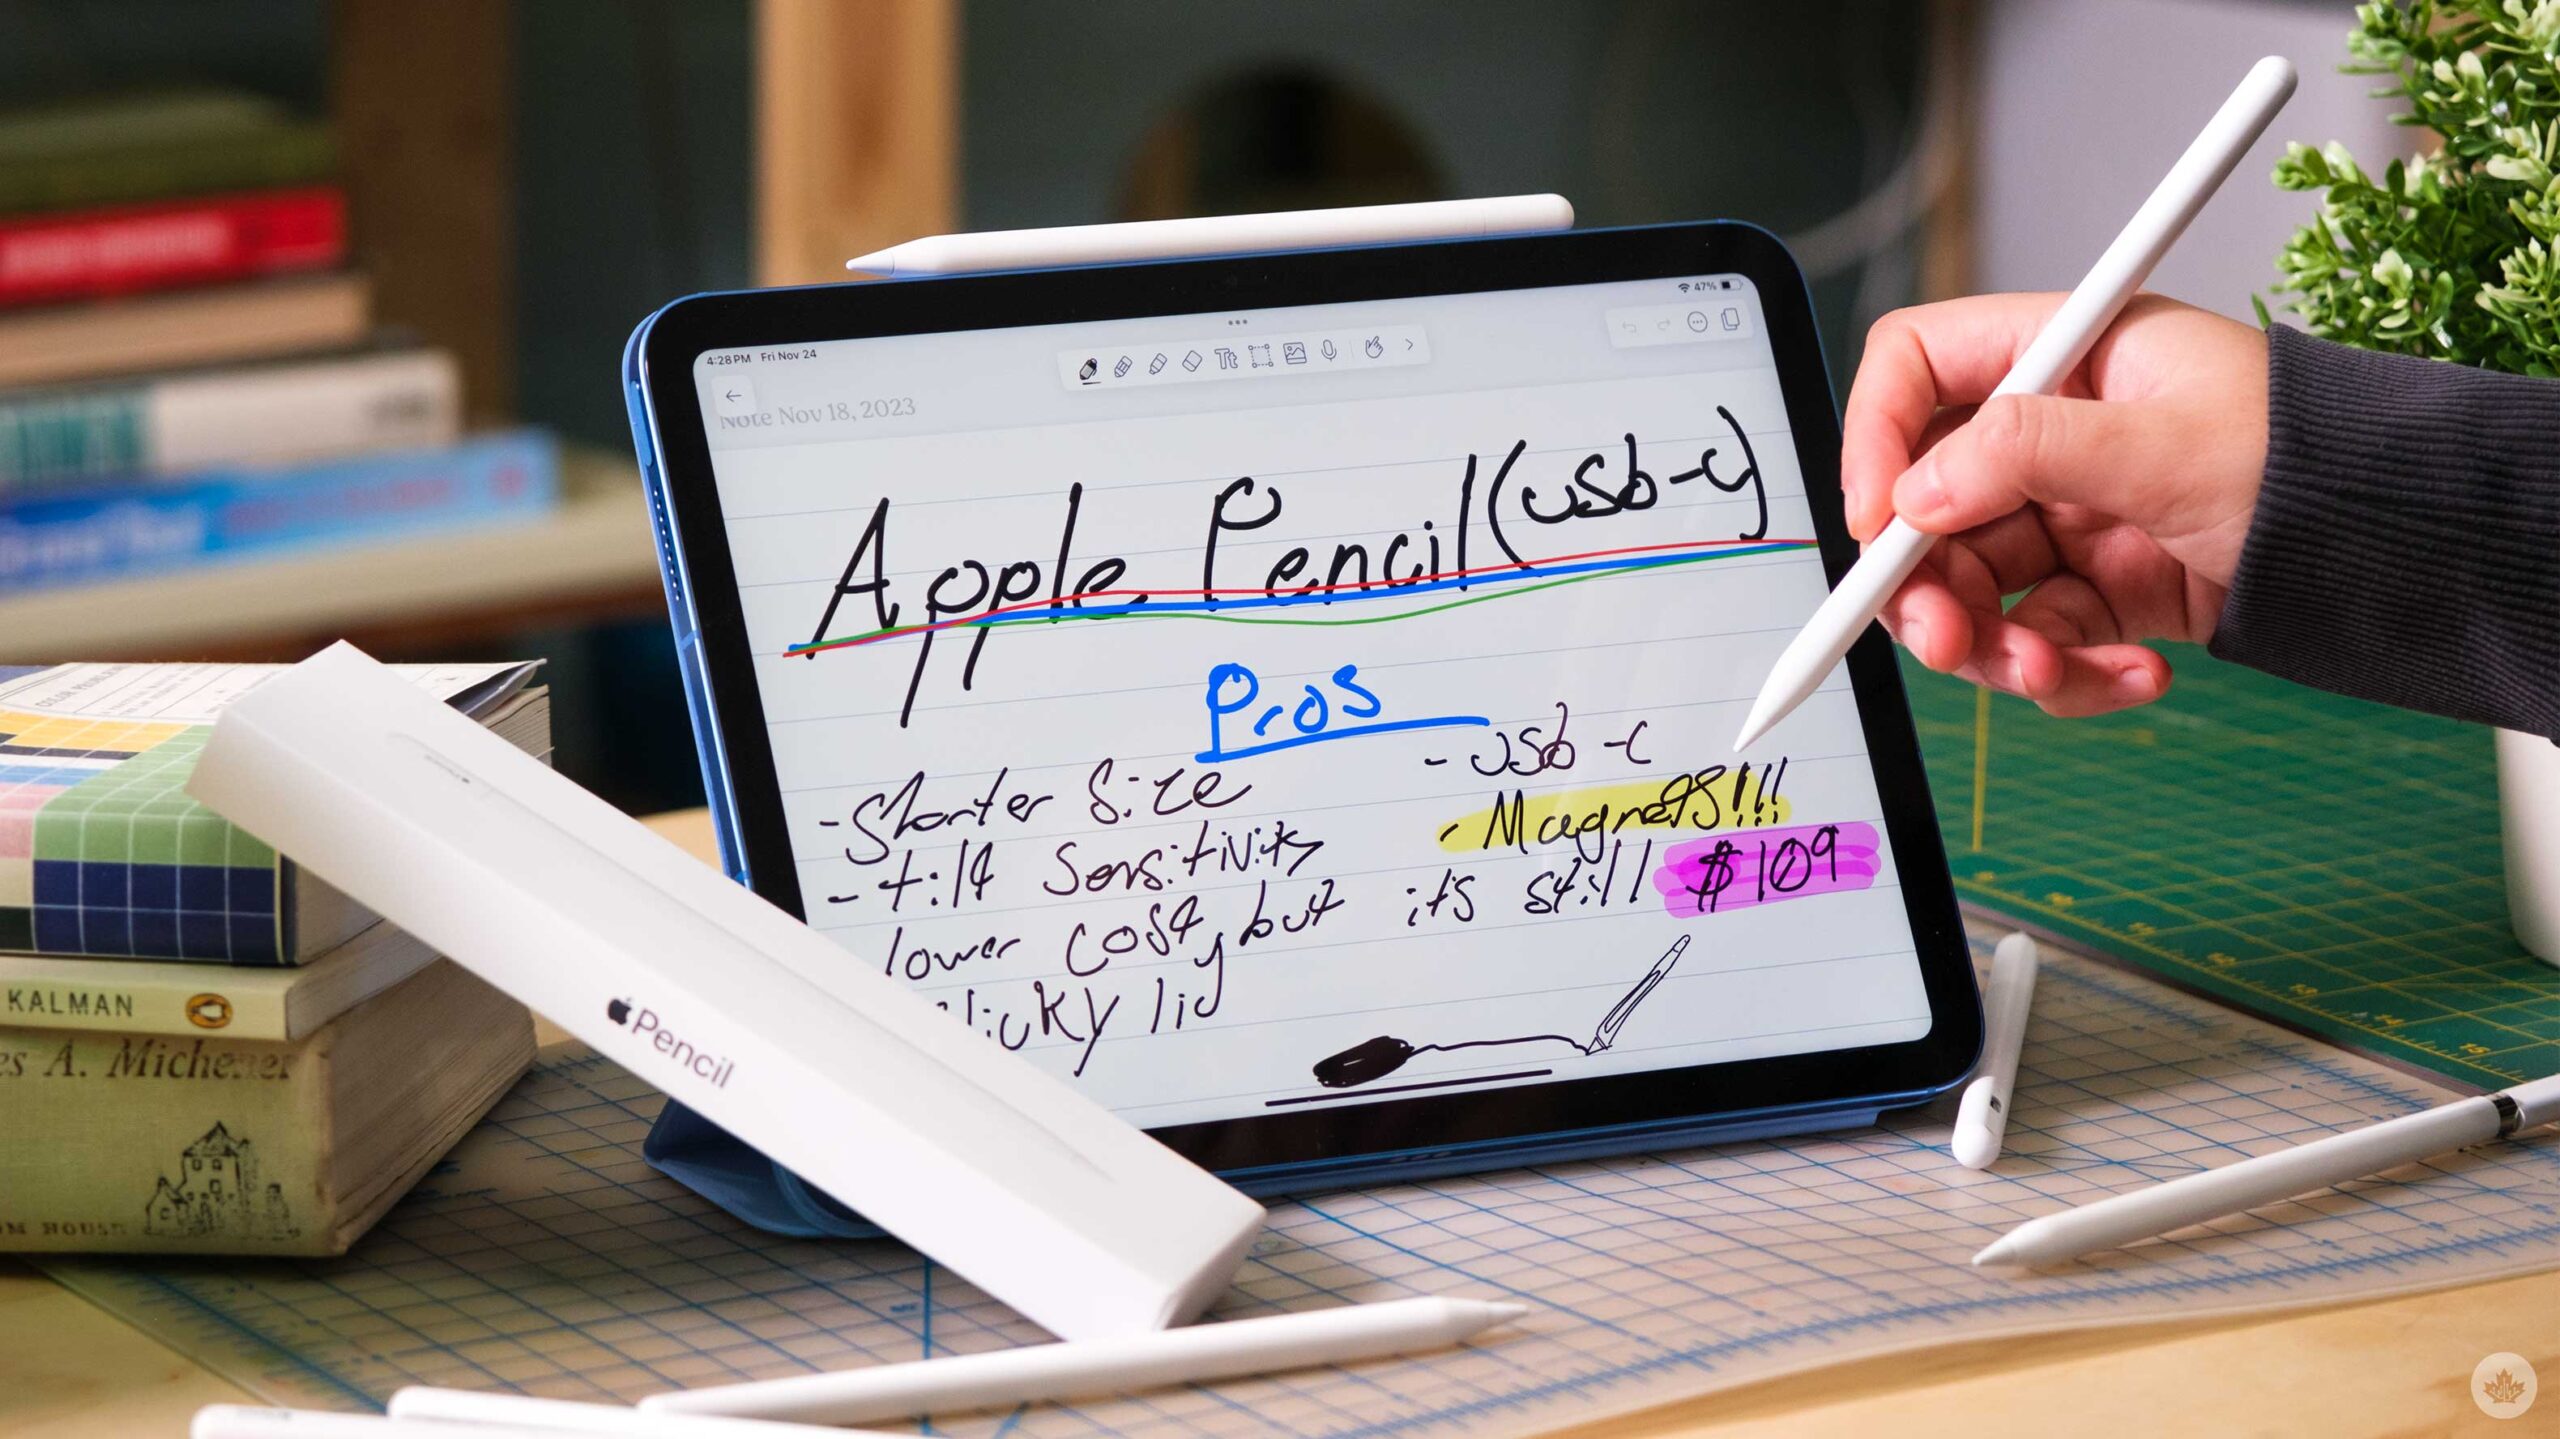 The USB-C Apple Pencil offers a lower price point, but is it low enough?